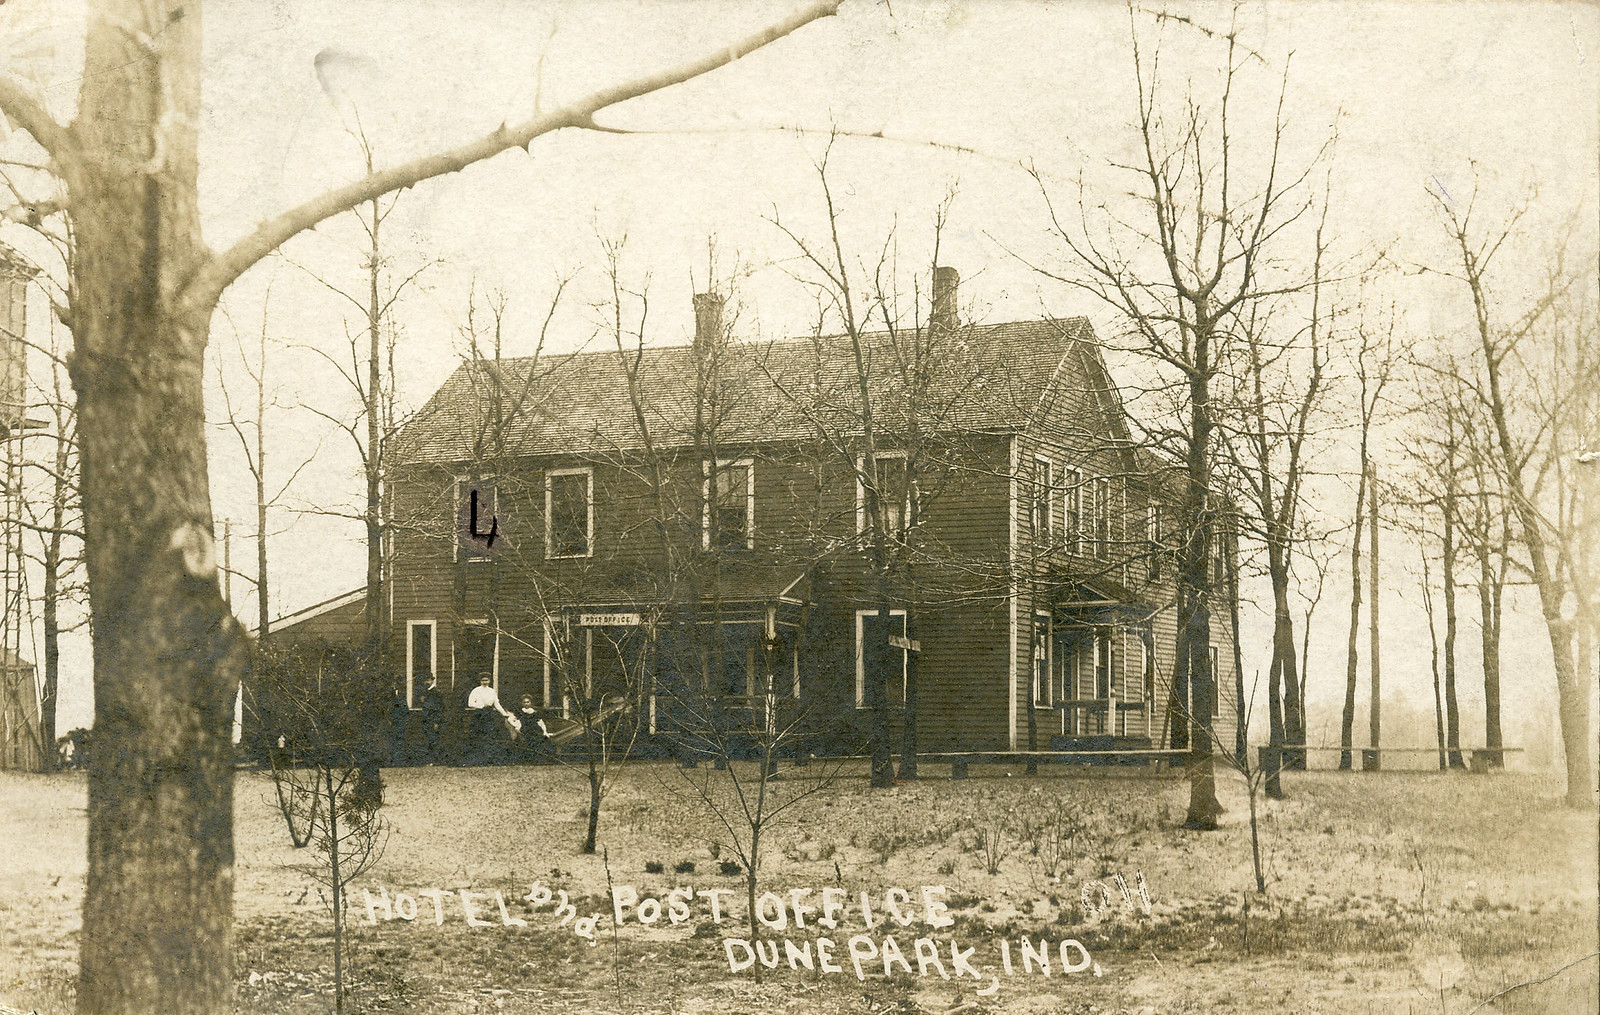 Hotel and Post Office, 1911 - Dune Park, Indiana